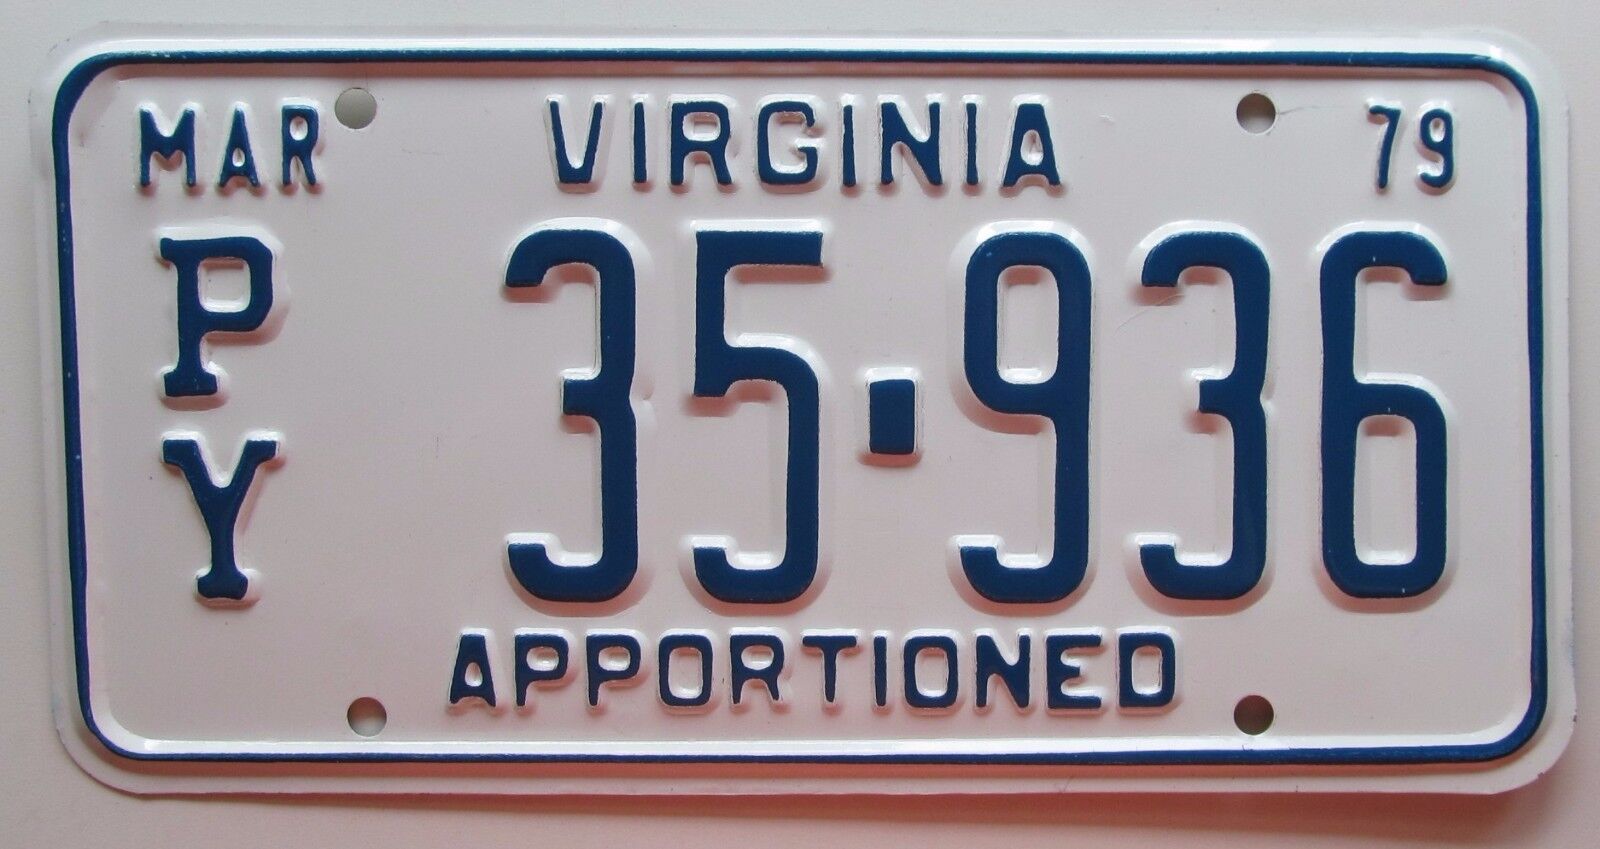 Virginia 1979 TRACTOR APPORTIONED License Plate SUPERB QUALITY # PY 35-936